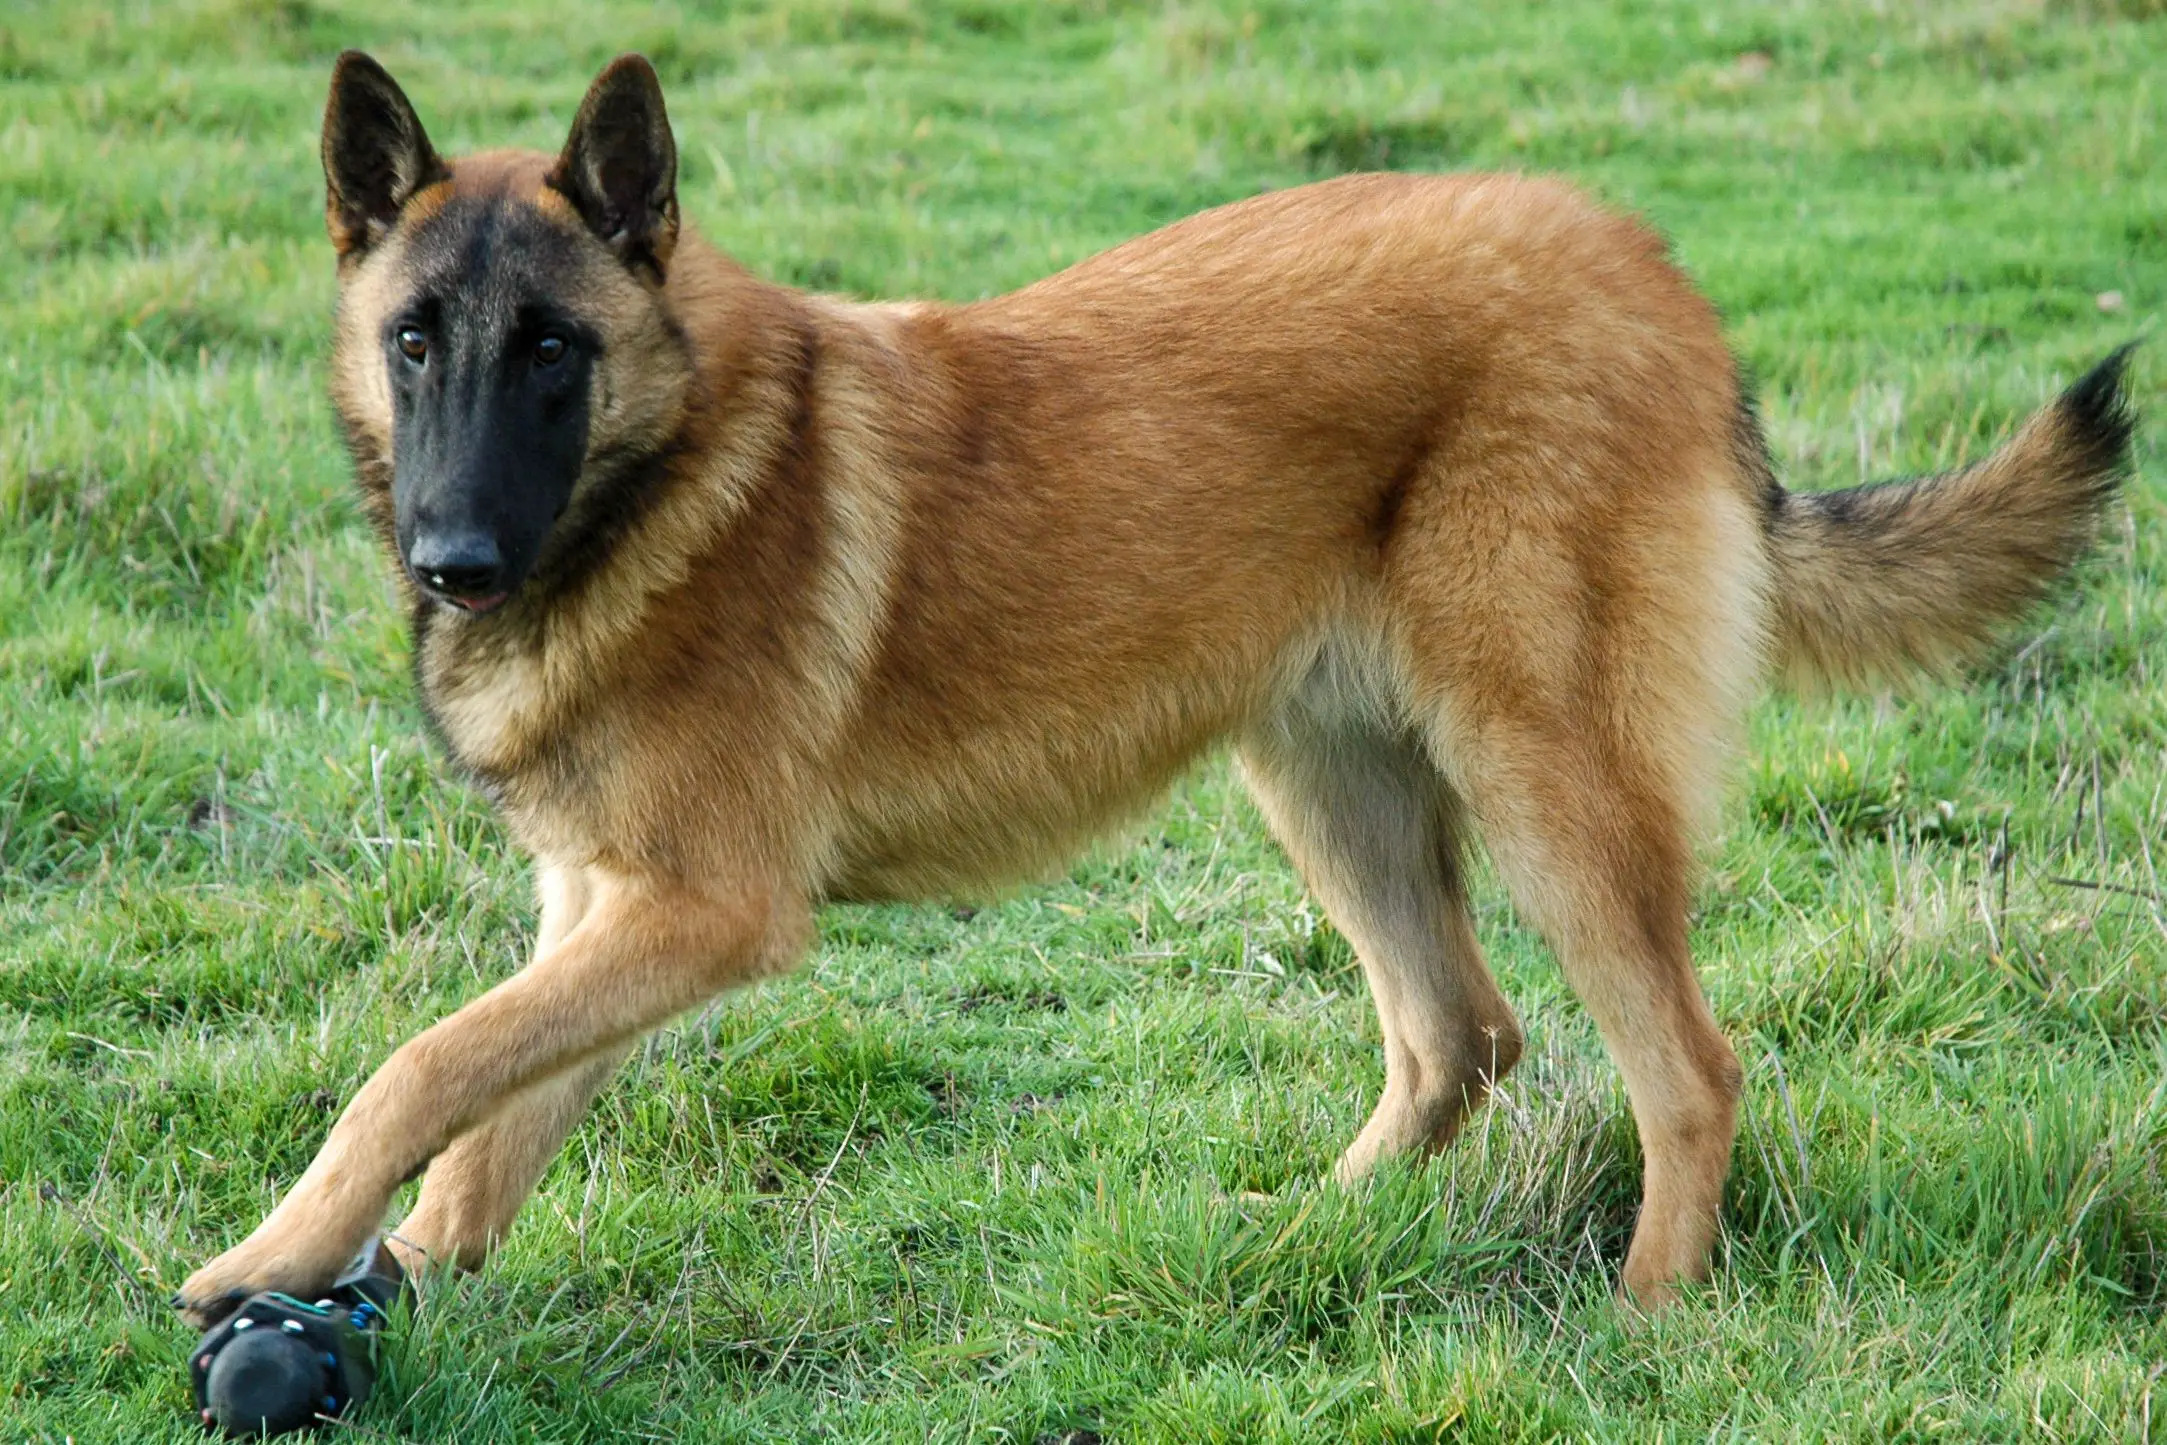 How To Potty Train A Belgian Malinois Puppy?